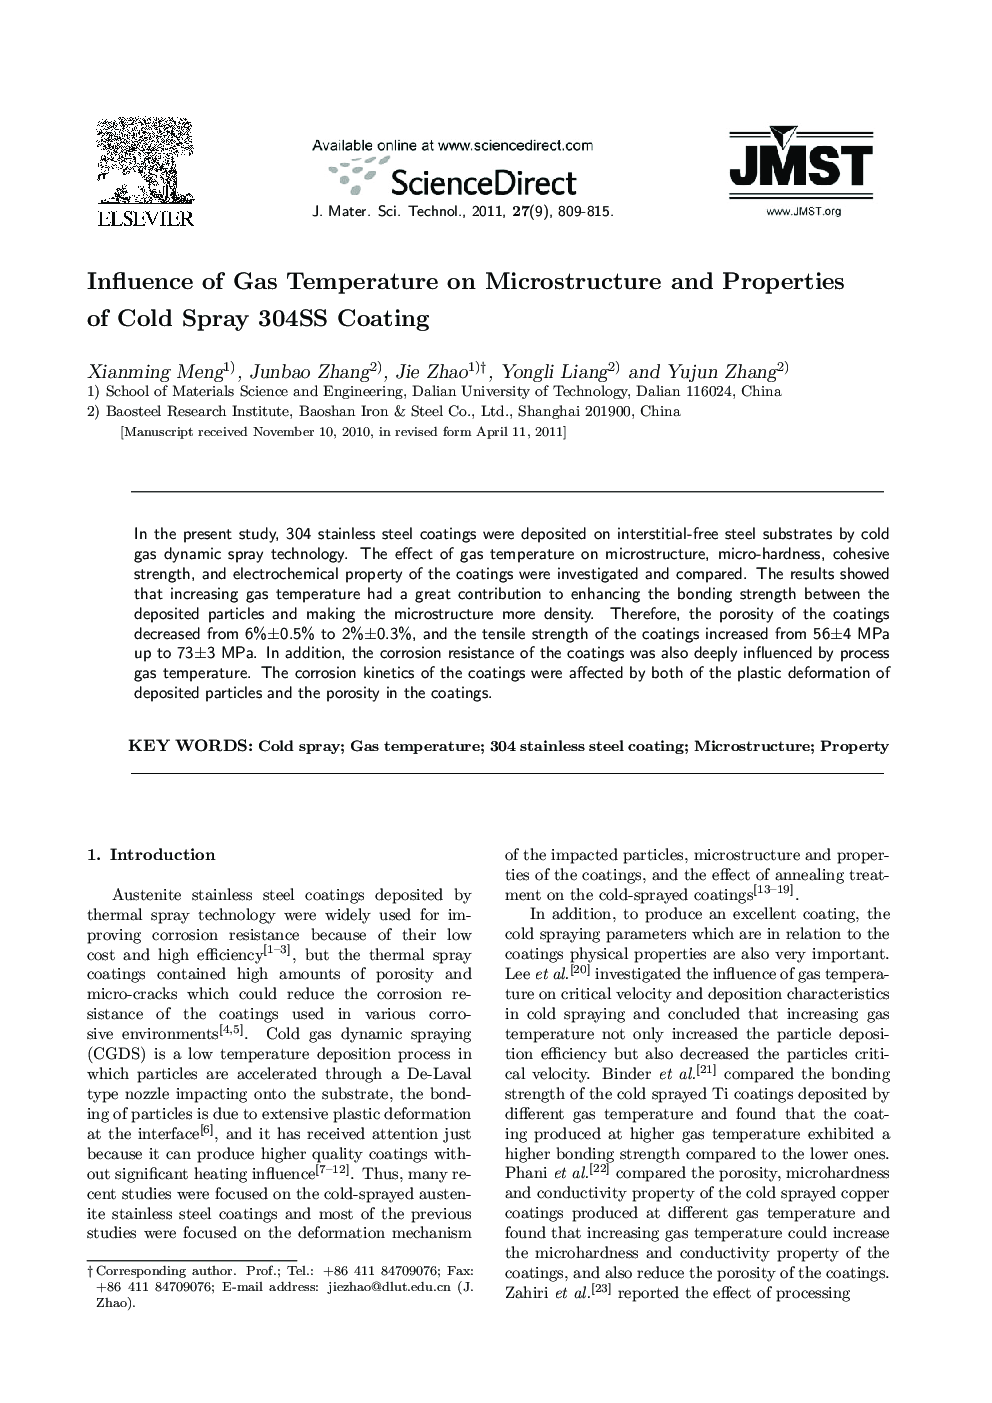 Influence of Gas Temperature on Microstructure and Properties of Cold Spray 304SS Coating